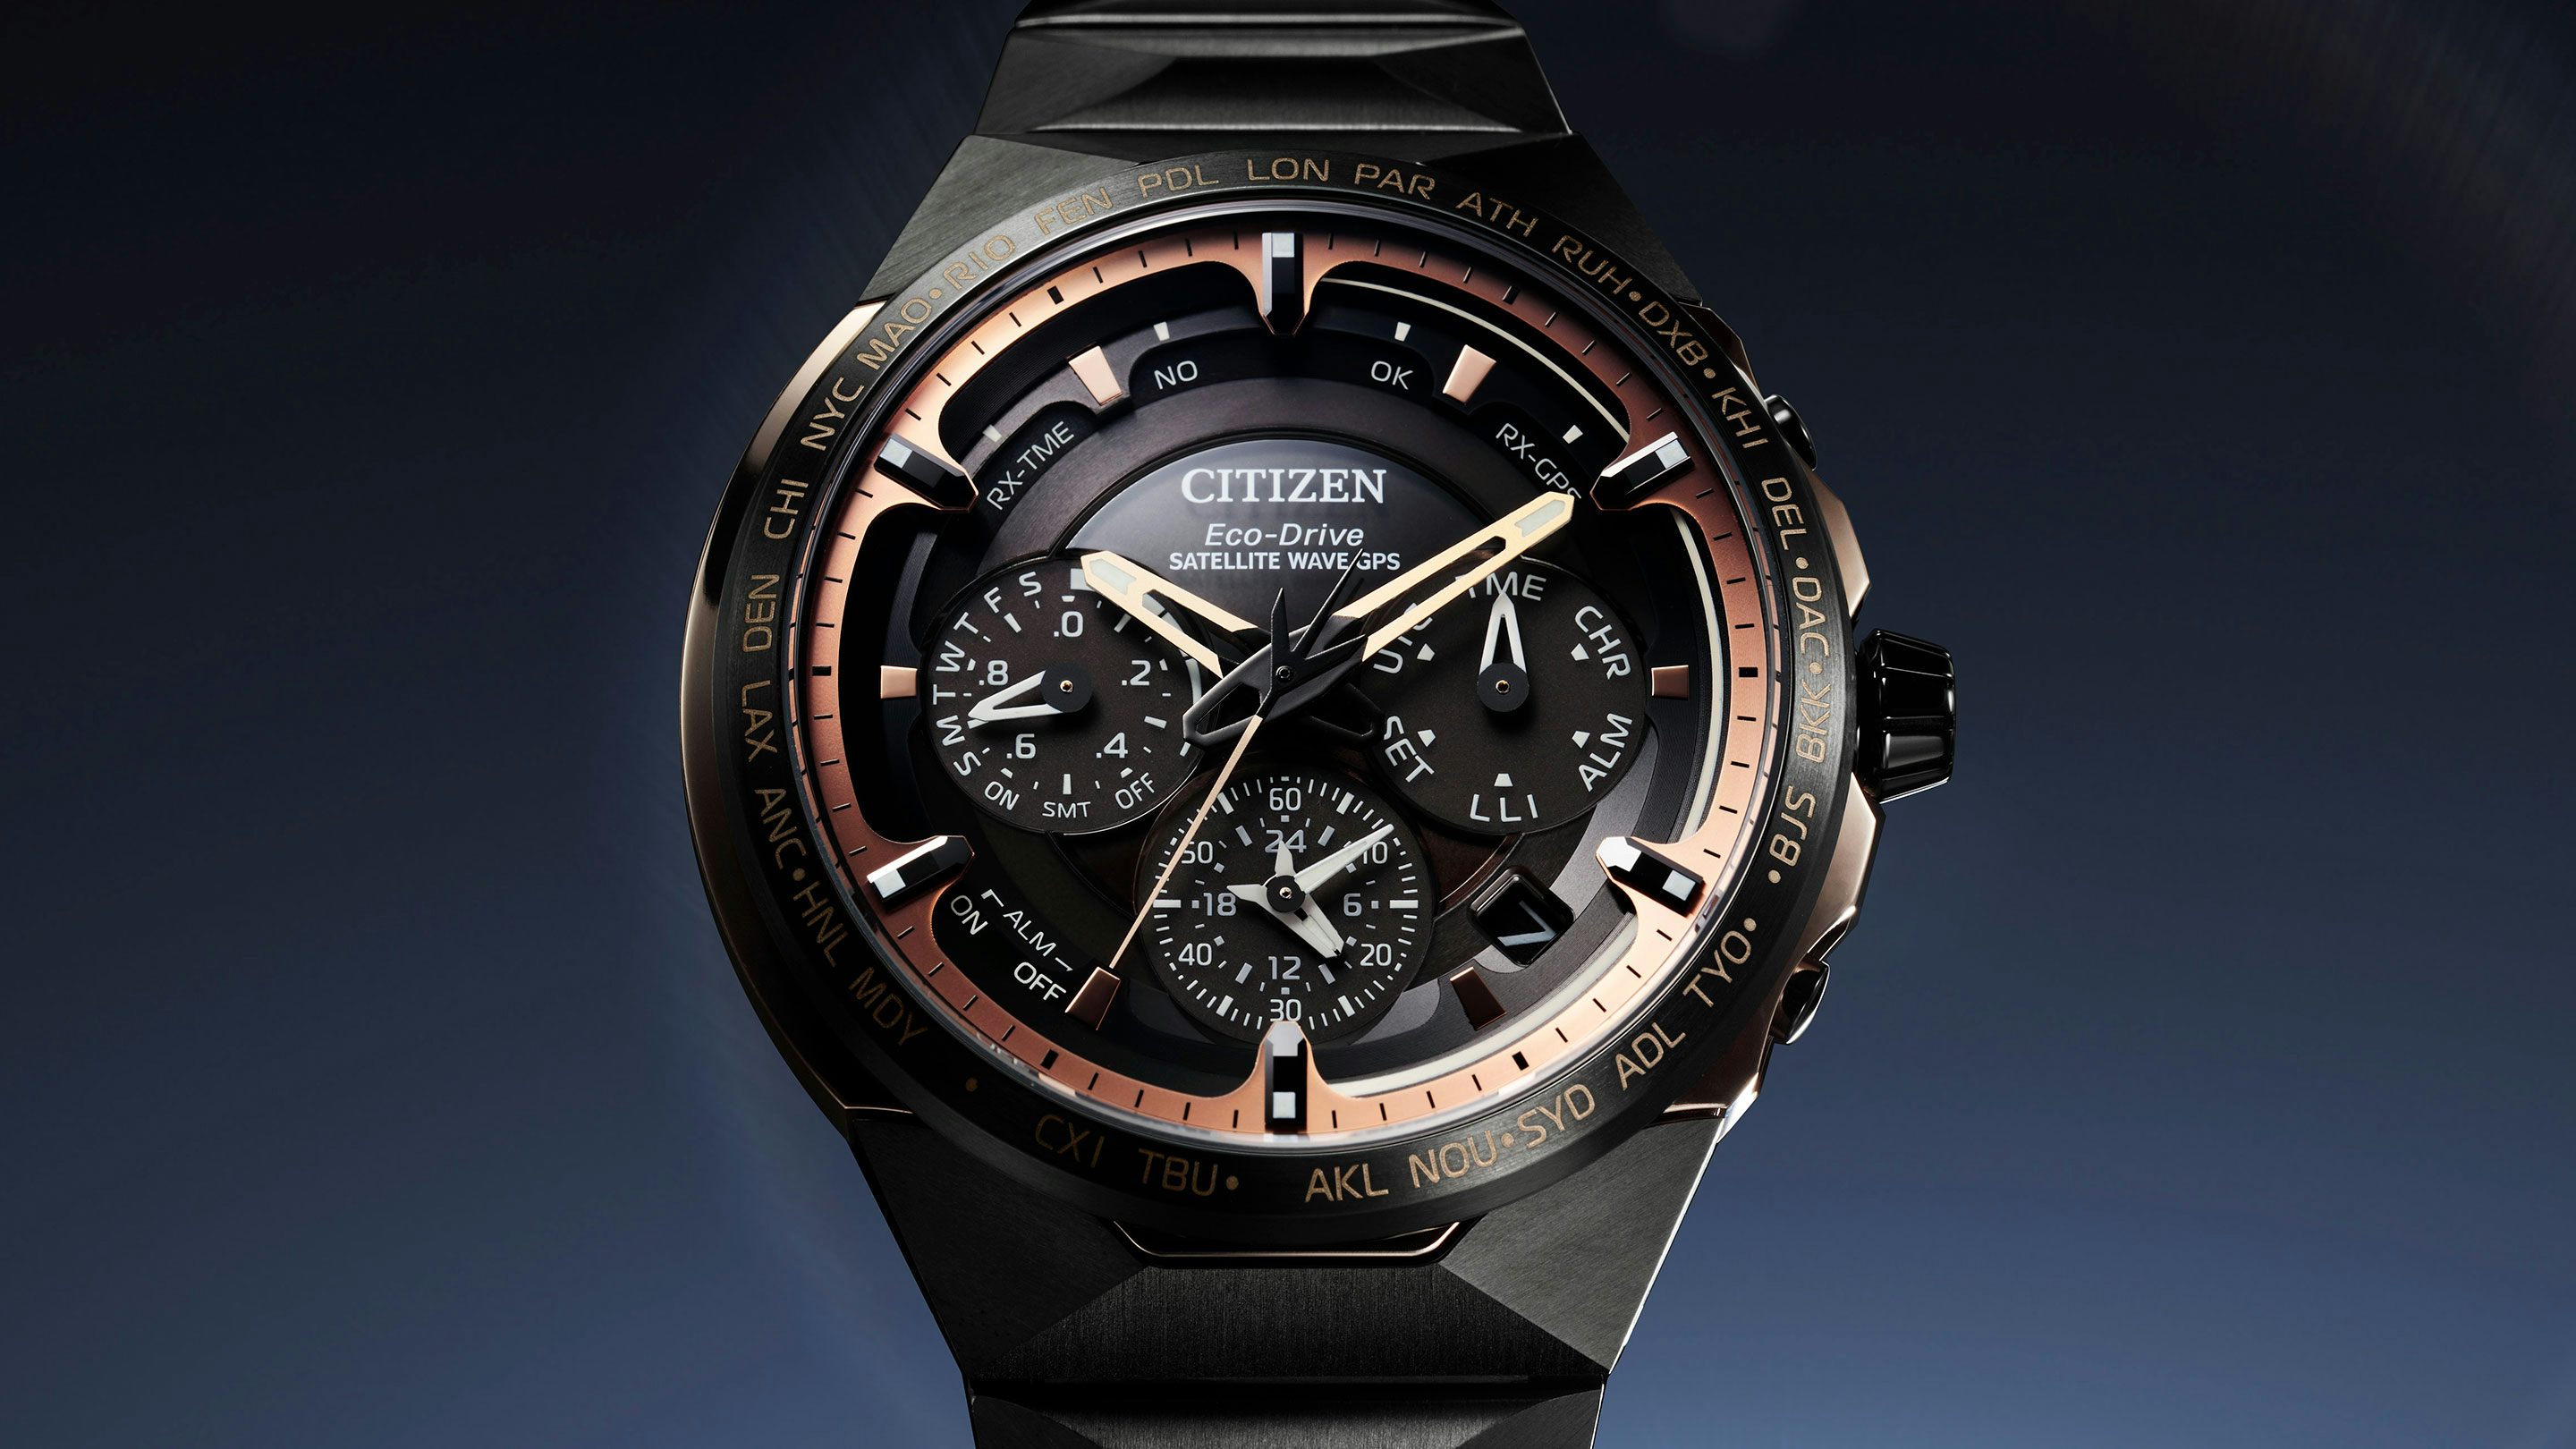 Introducing The Citizen Satellite Wave Gps F950 Titanium 50th Anniversary Limited Edition Hodinkee